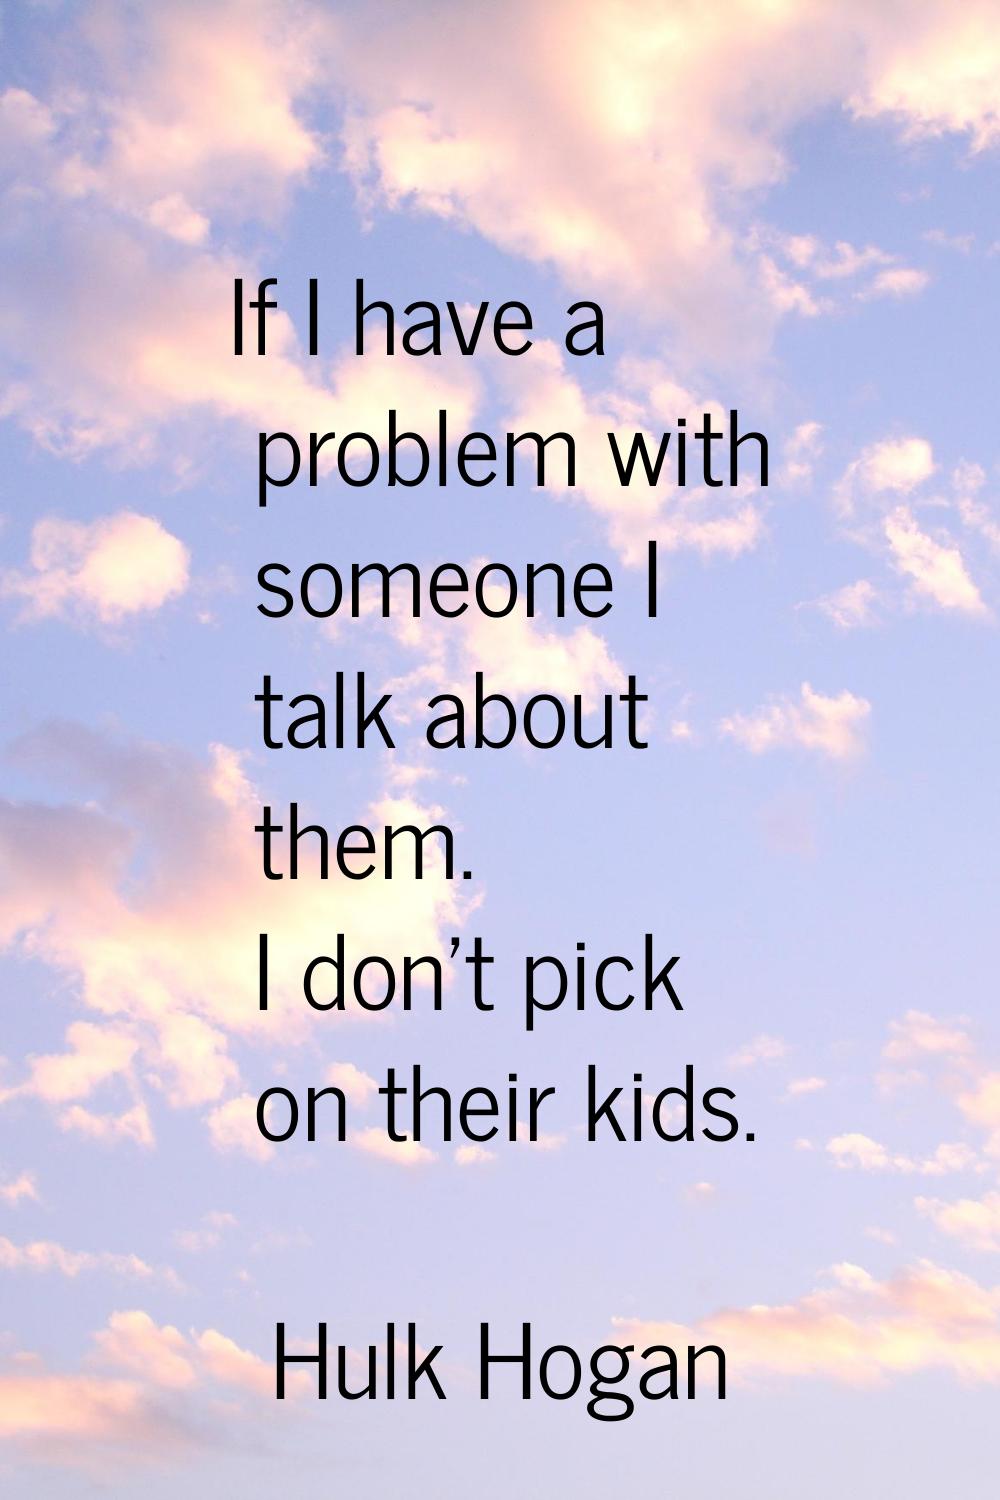 If I have a problem with someone I talk about them. I don't pick on their kids.